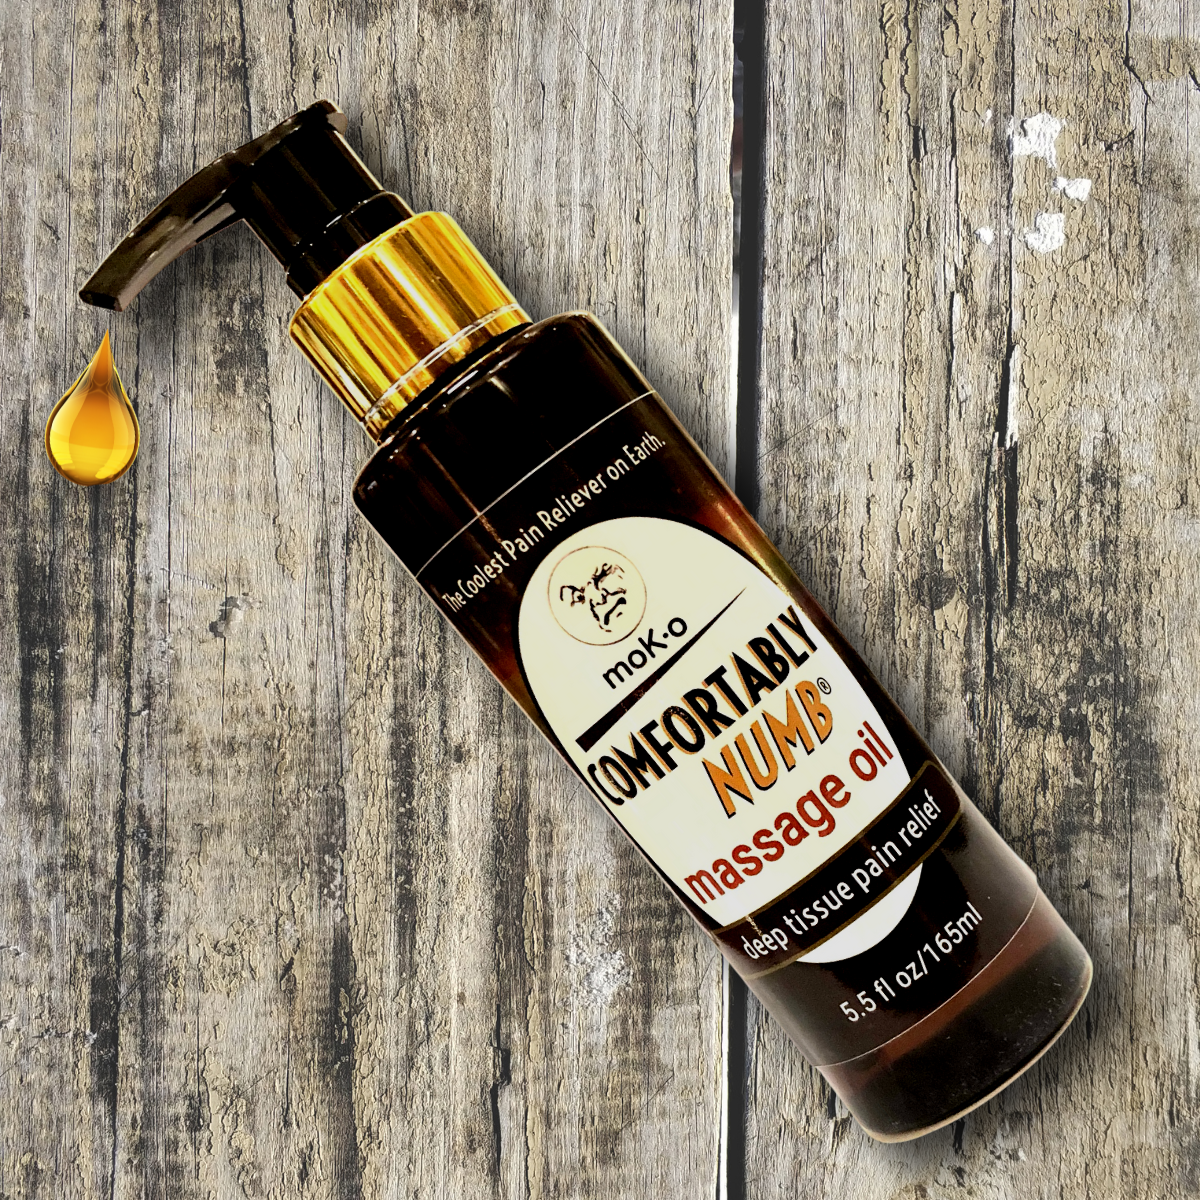 Comfortably Numb's HOT NEW PRODUCT. A deep tissue massage oil with the infamous Comfortably Numb Oil combined with ylang ylang and ginger oil. on a wood plank.